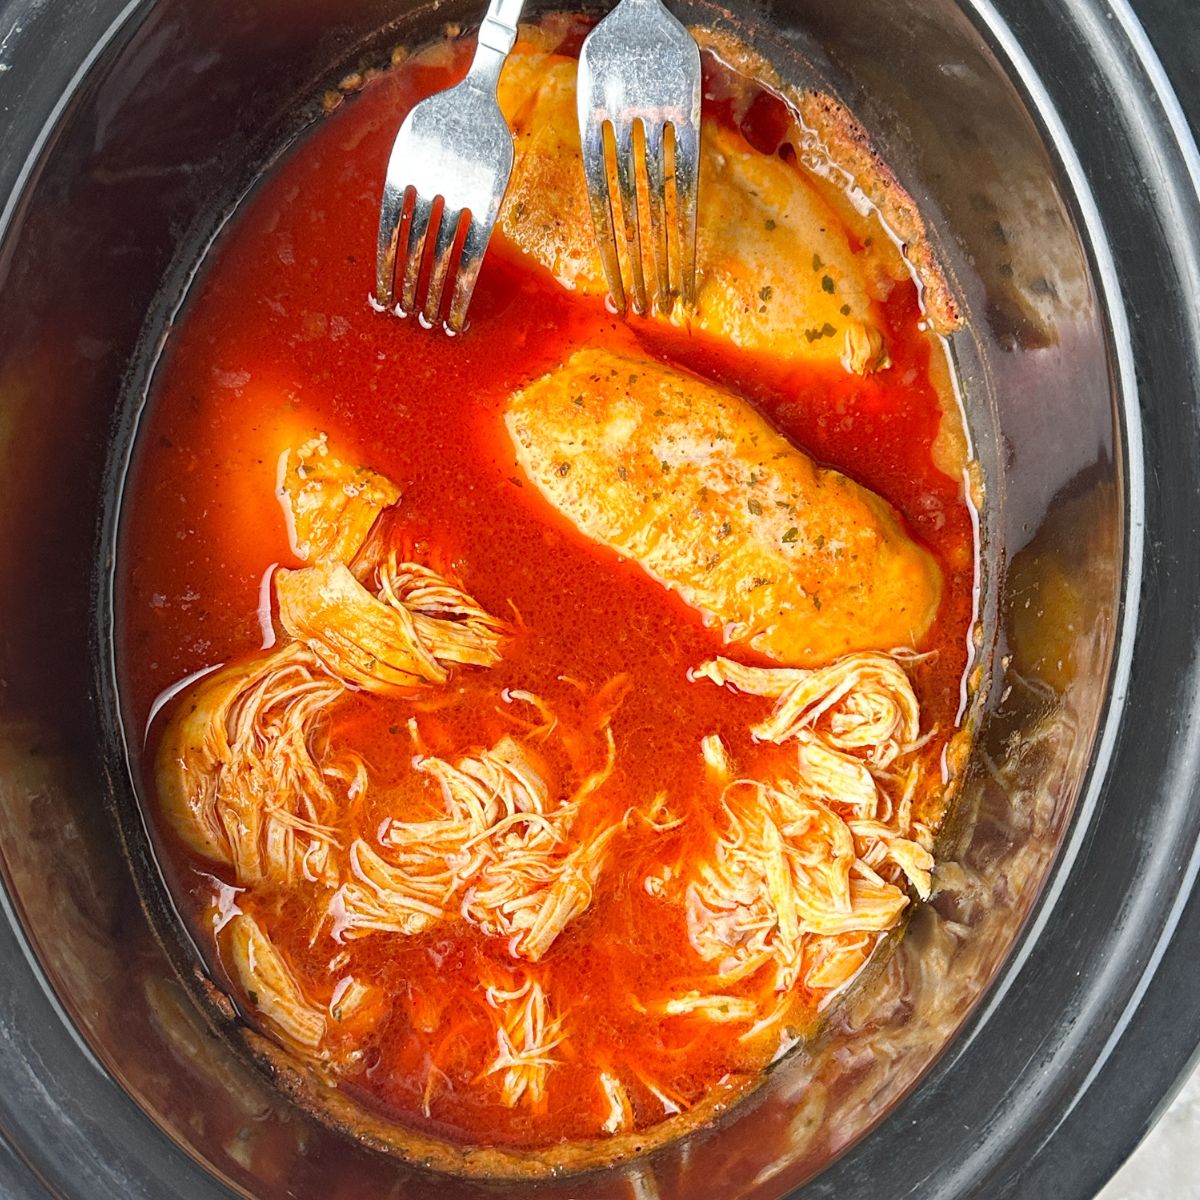 Slow cooker with chicken, buffalo sauce, and forks.